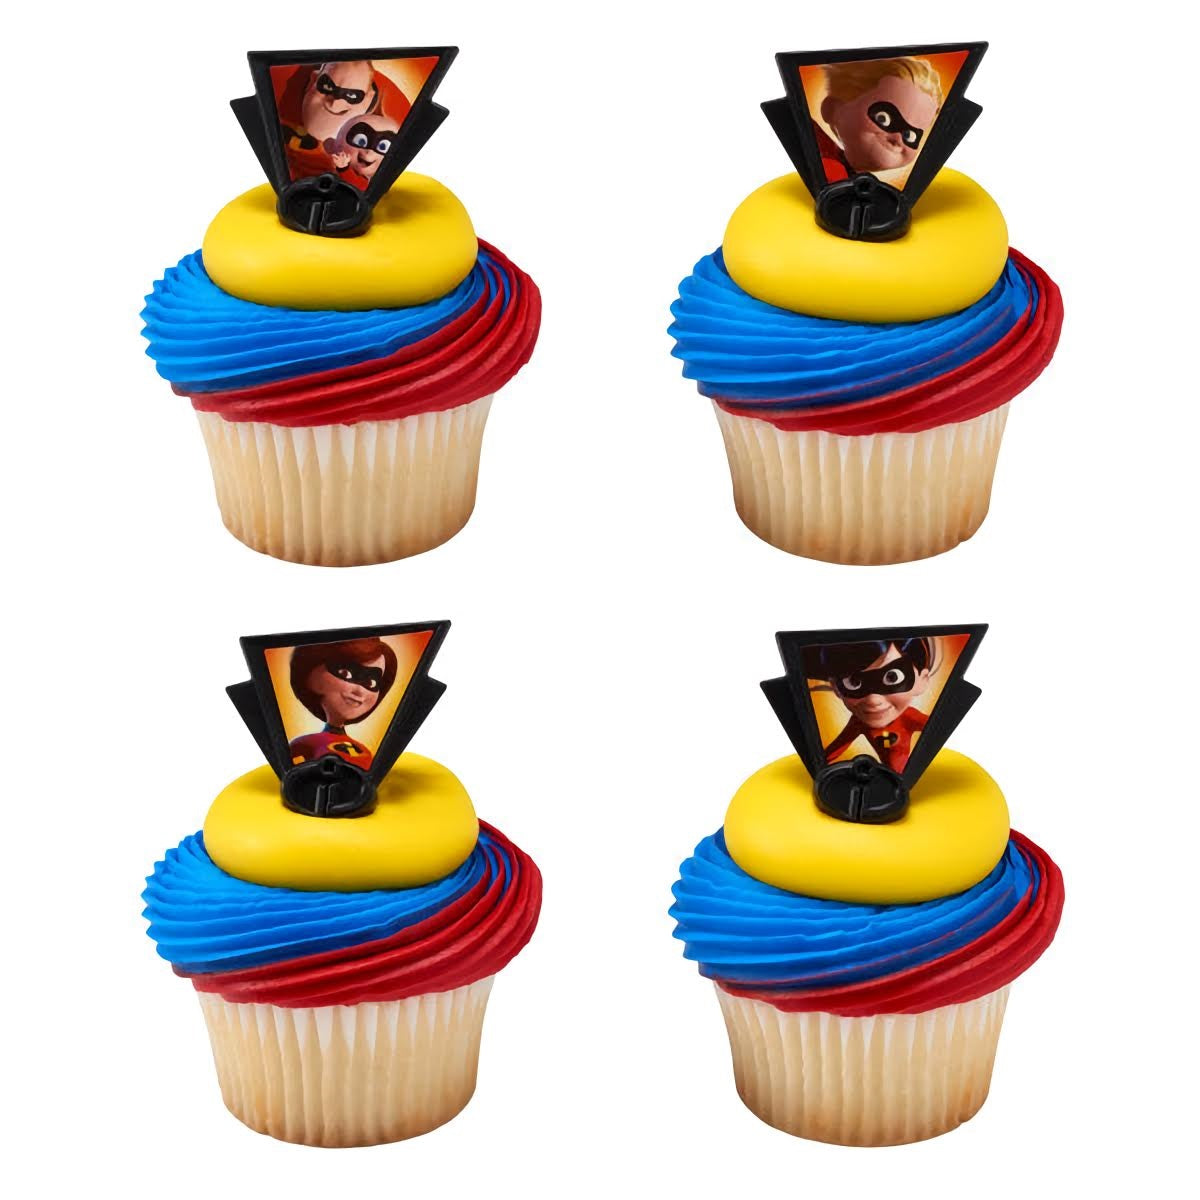 Vanilla cupcakes with vibrant red and blue swirled icing topped with 'Incredibles 2' character rings featuring Mr. Incredible, Elastigirl, and Violet, perfect for superhero-themed parties.